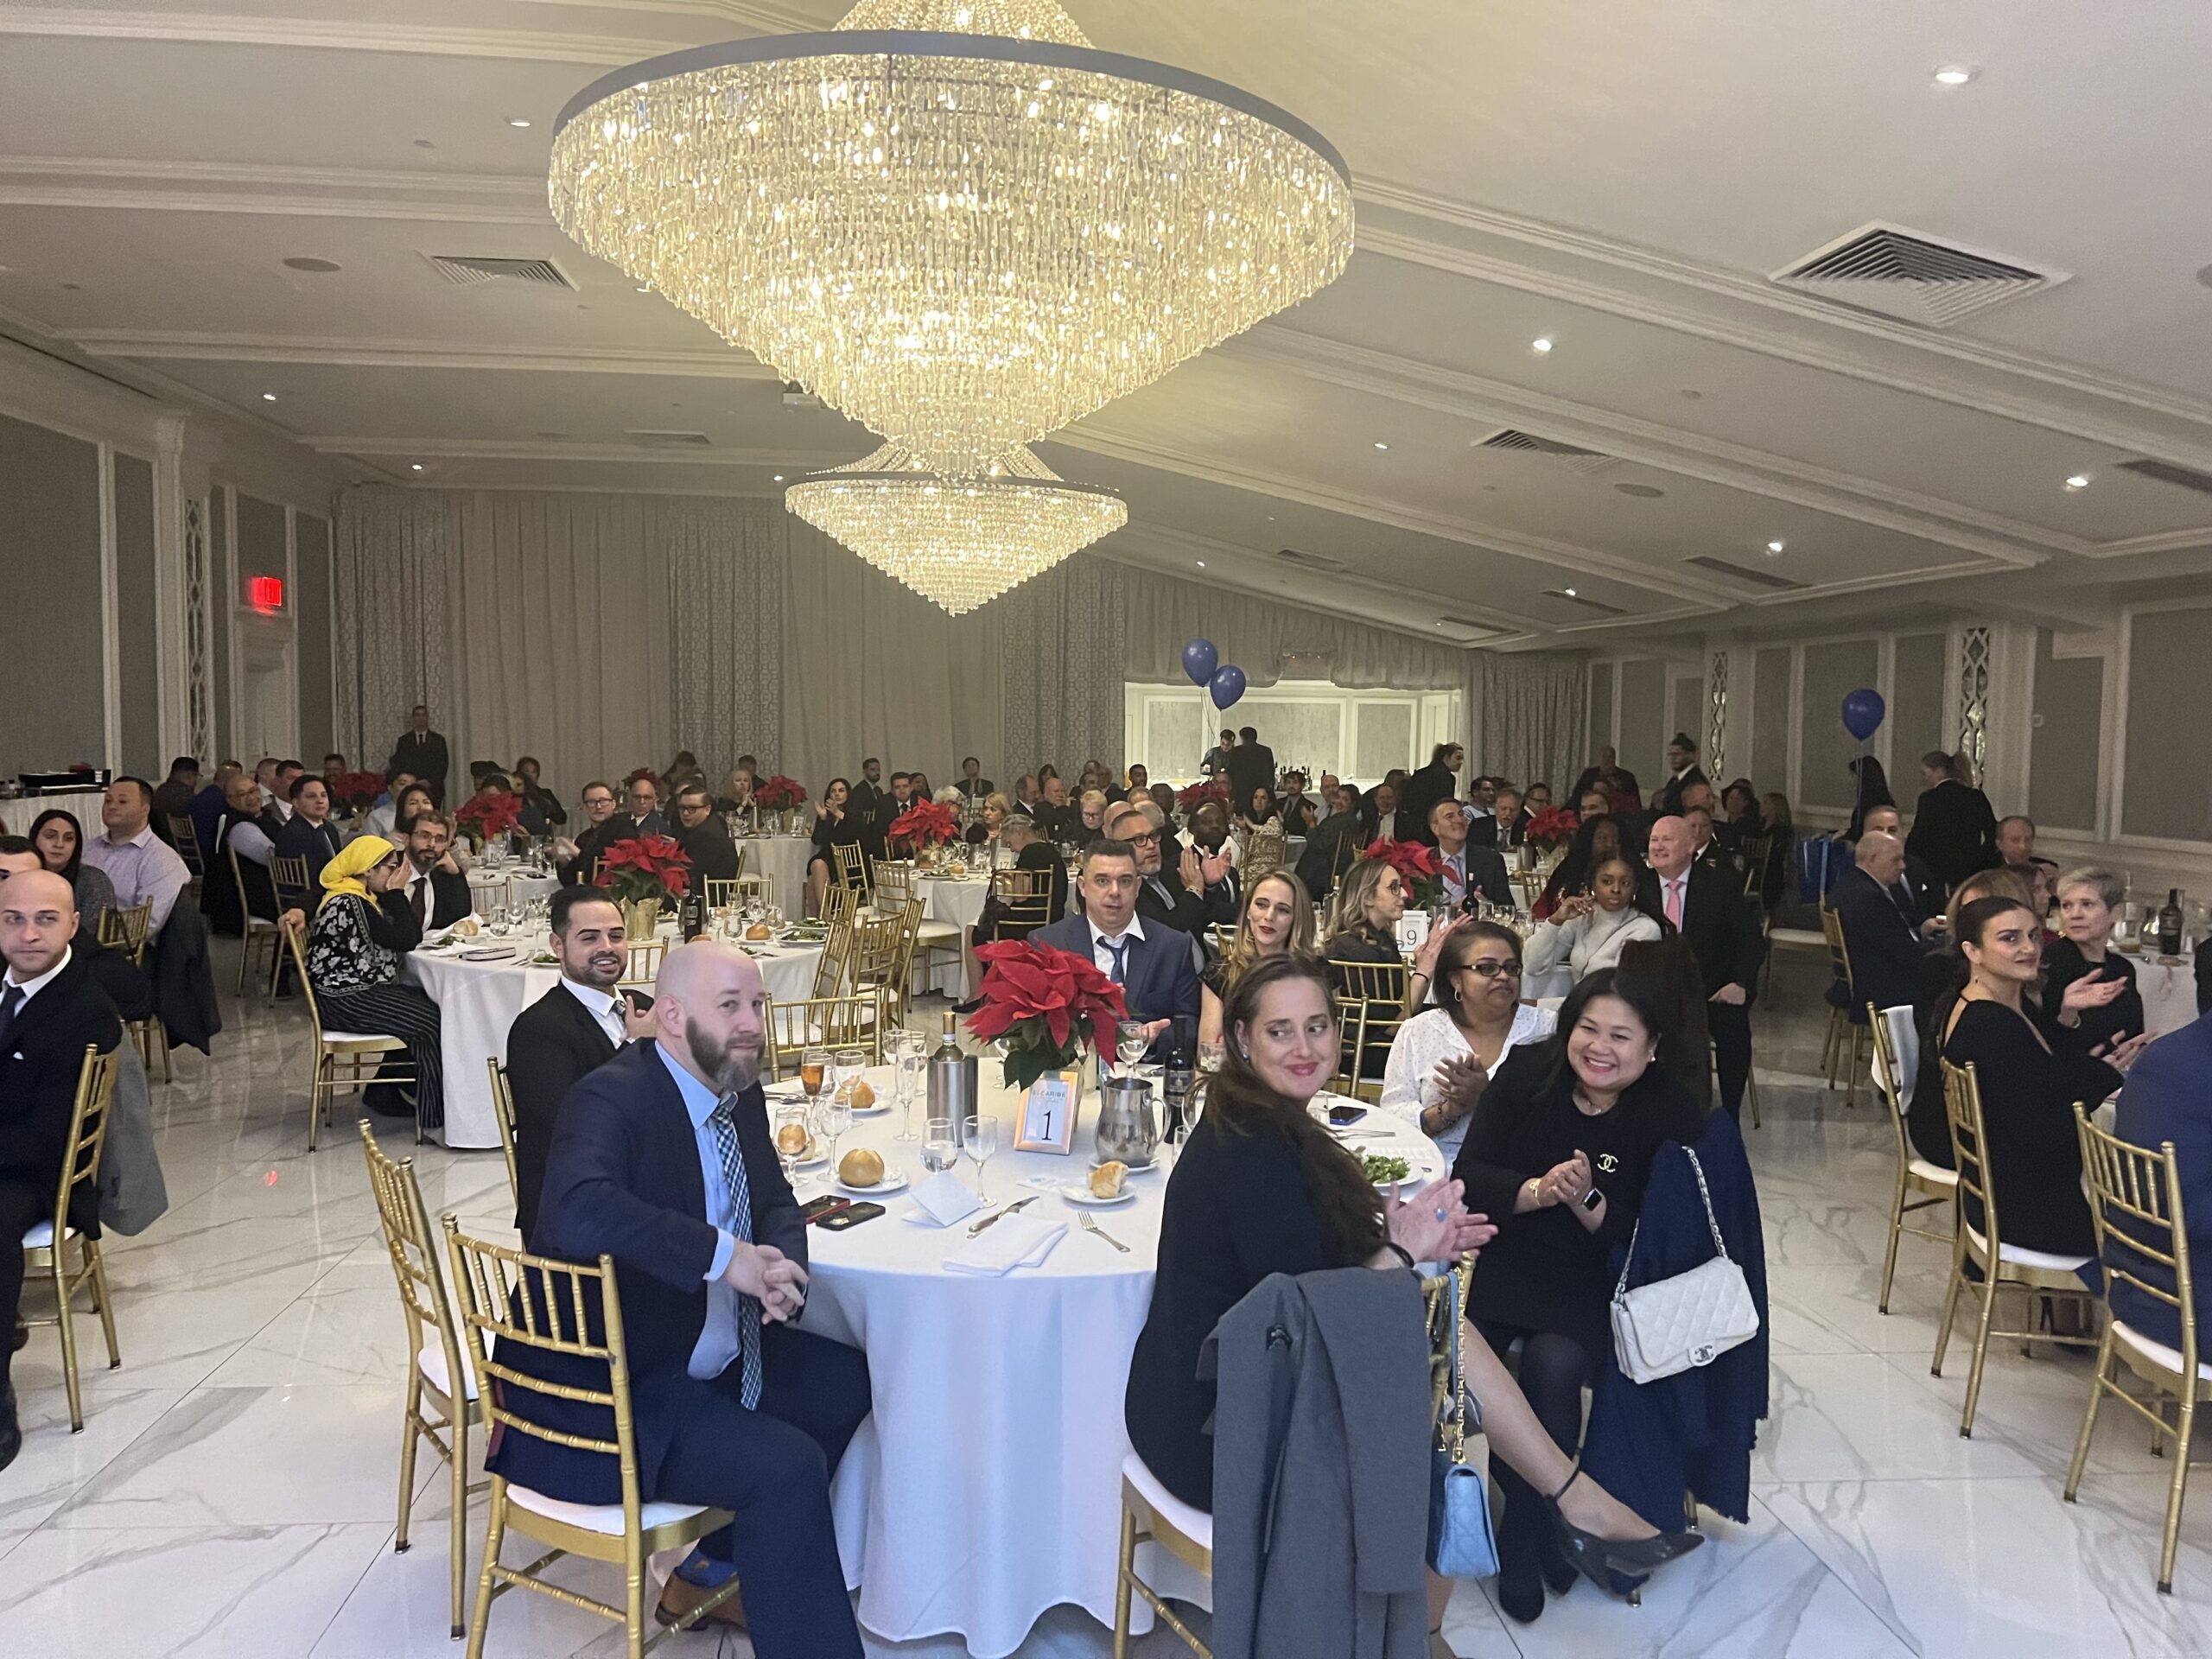 Maimonides held its eighth annual Community for Kids Benefit this past Thursday at the El Caribe Country Club.